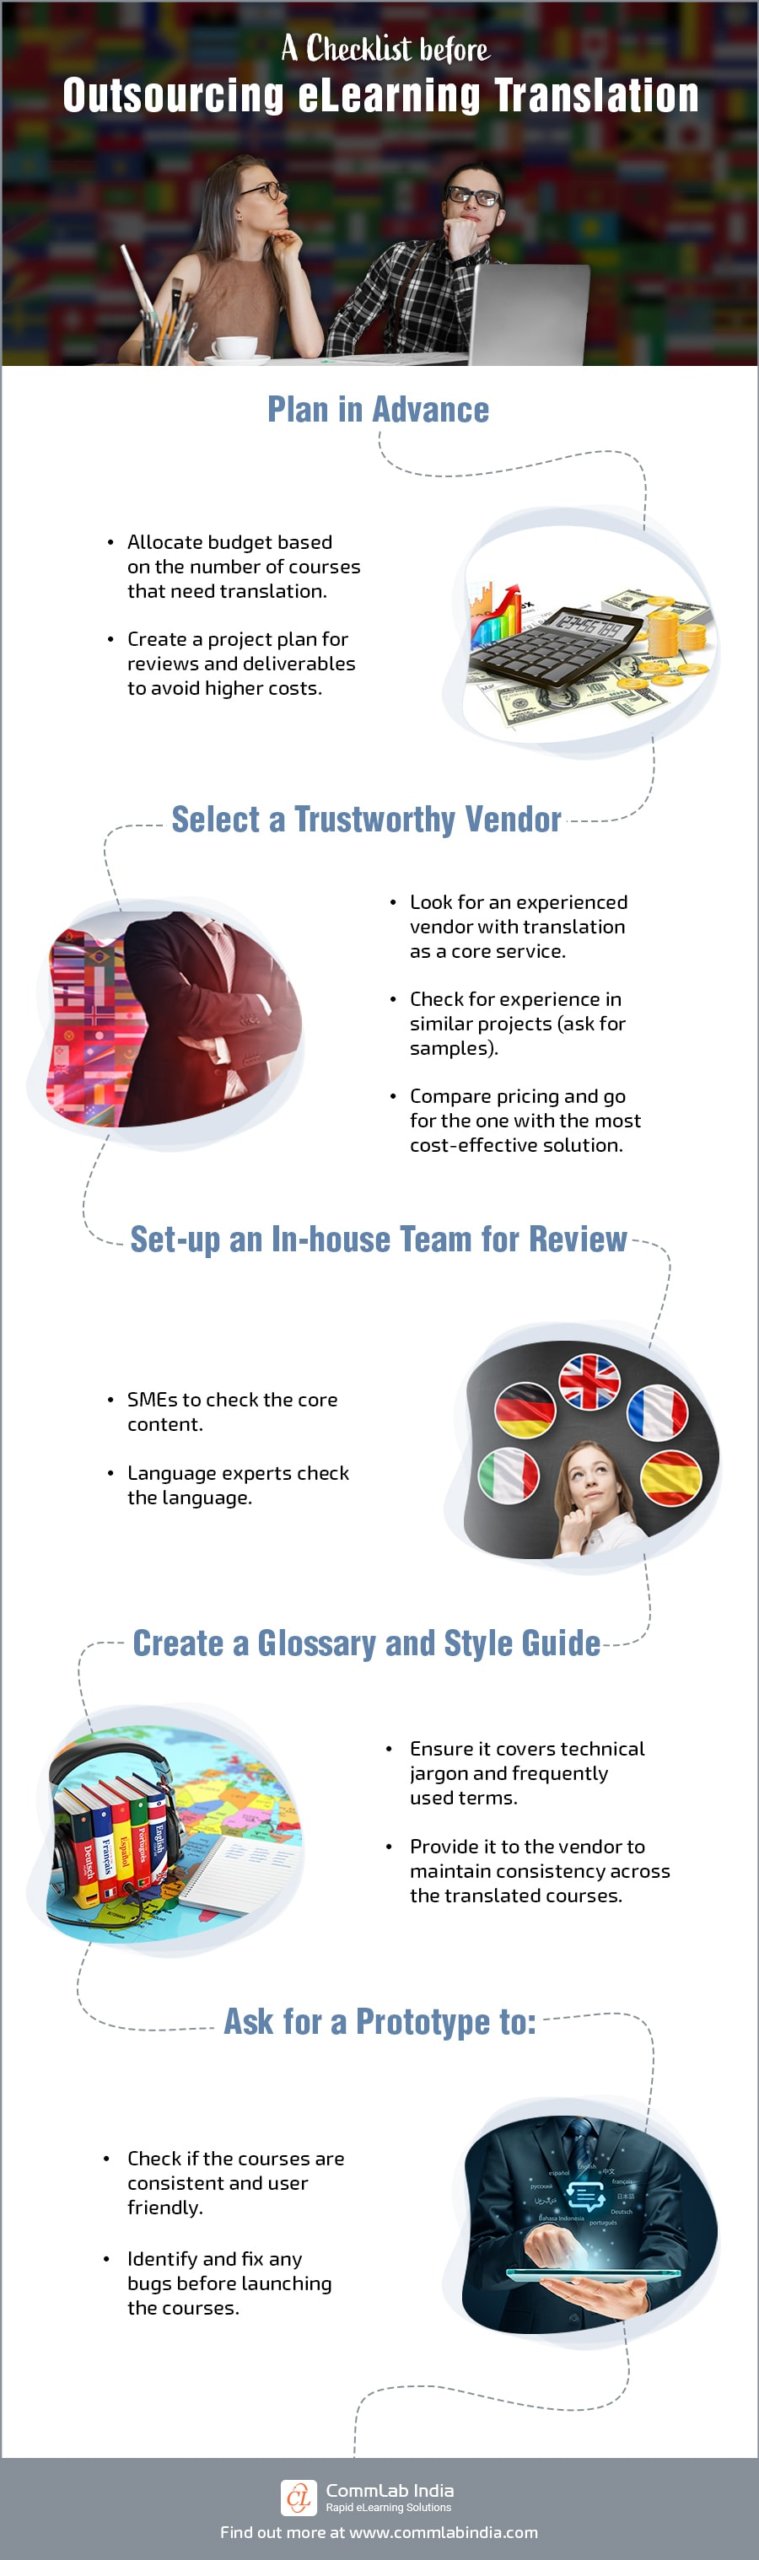 eLearning Translation: A 5-Point Checklist for Outsourcing